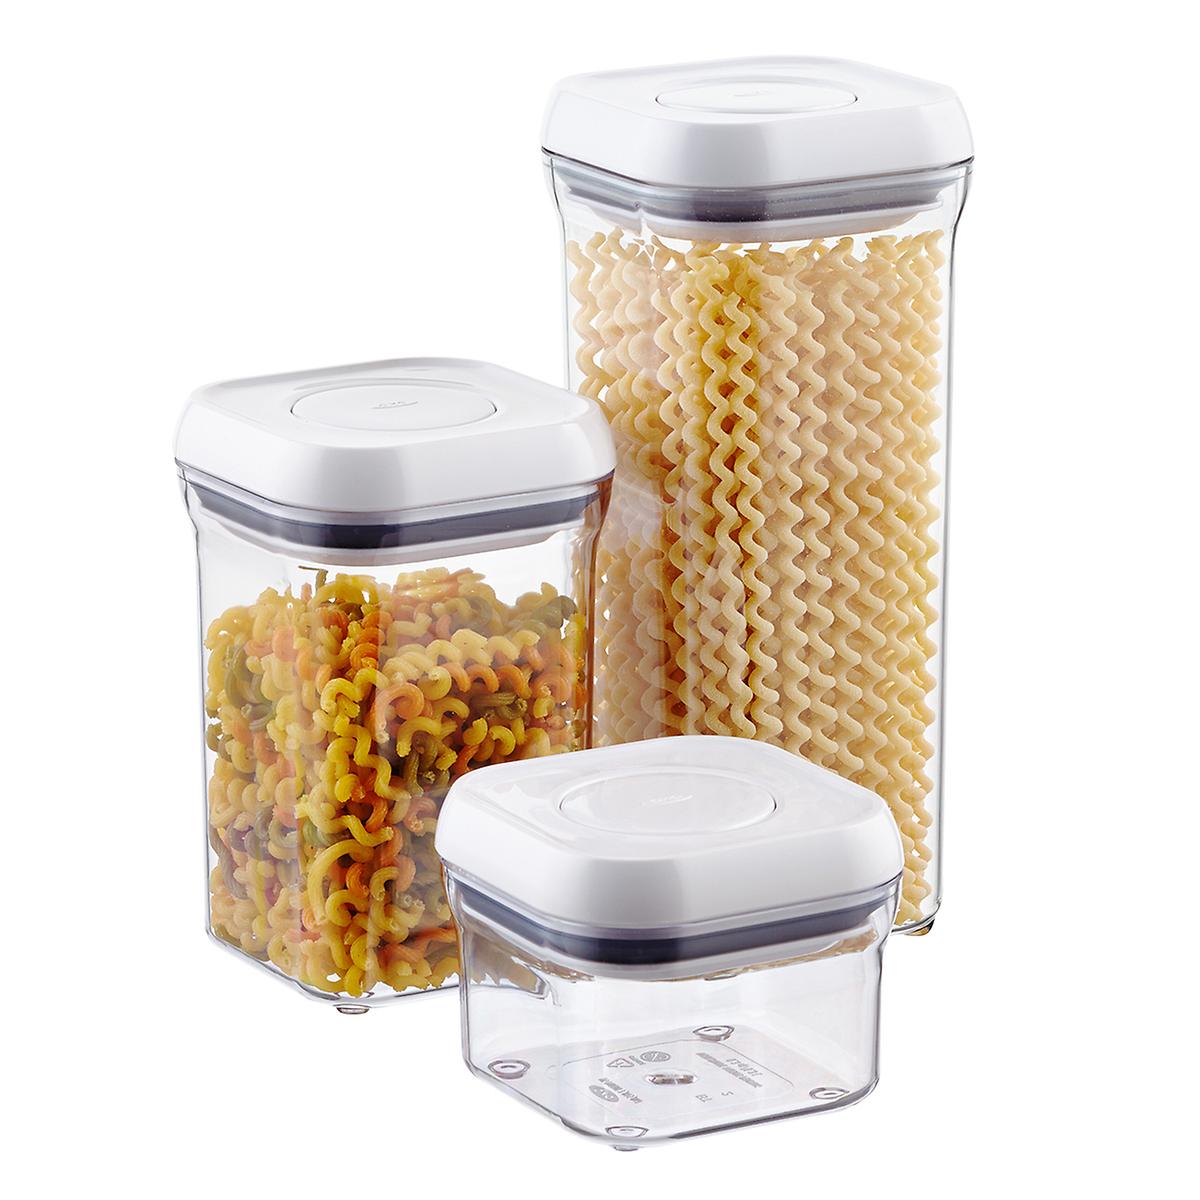 Modular Canisters, Food Storage Container